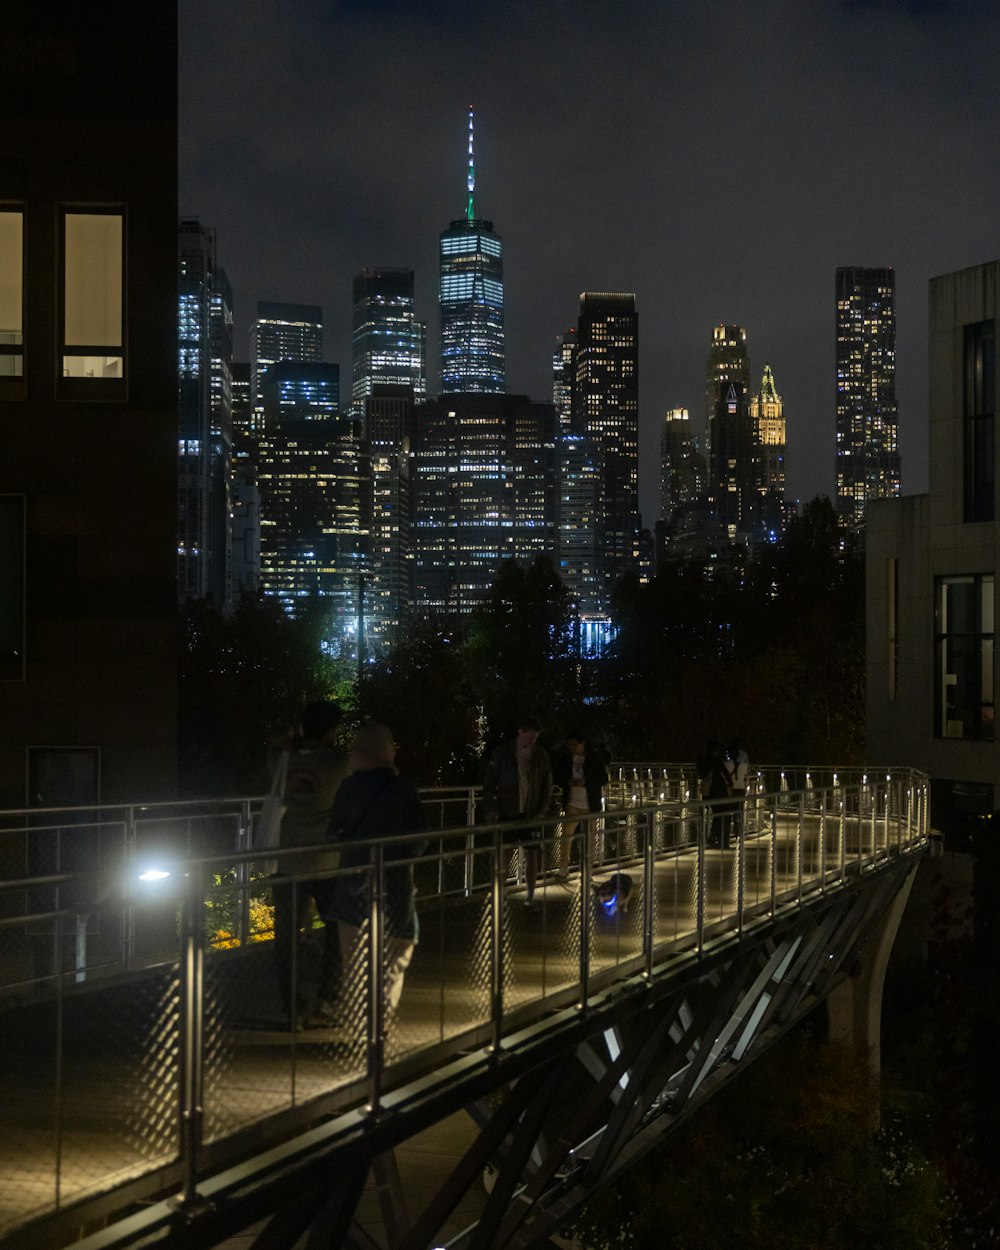 a person standing on a bridge over a city at night